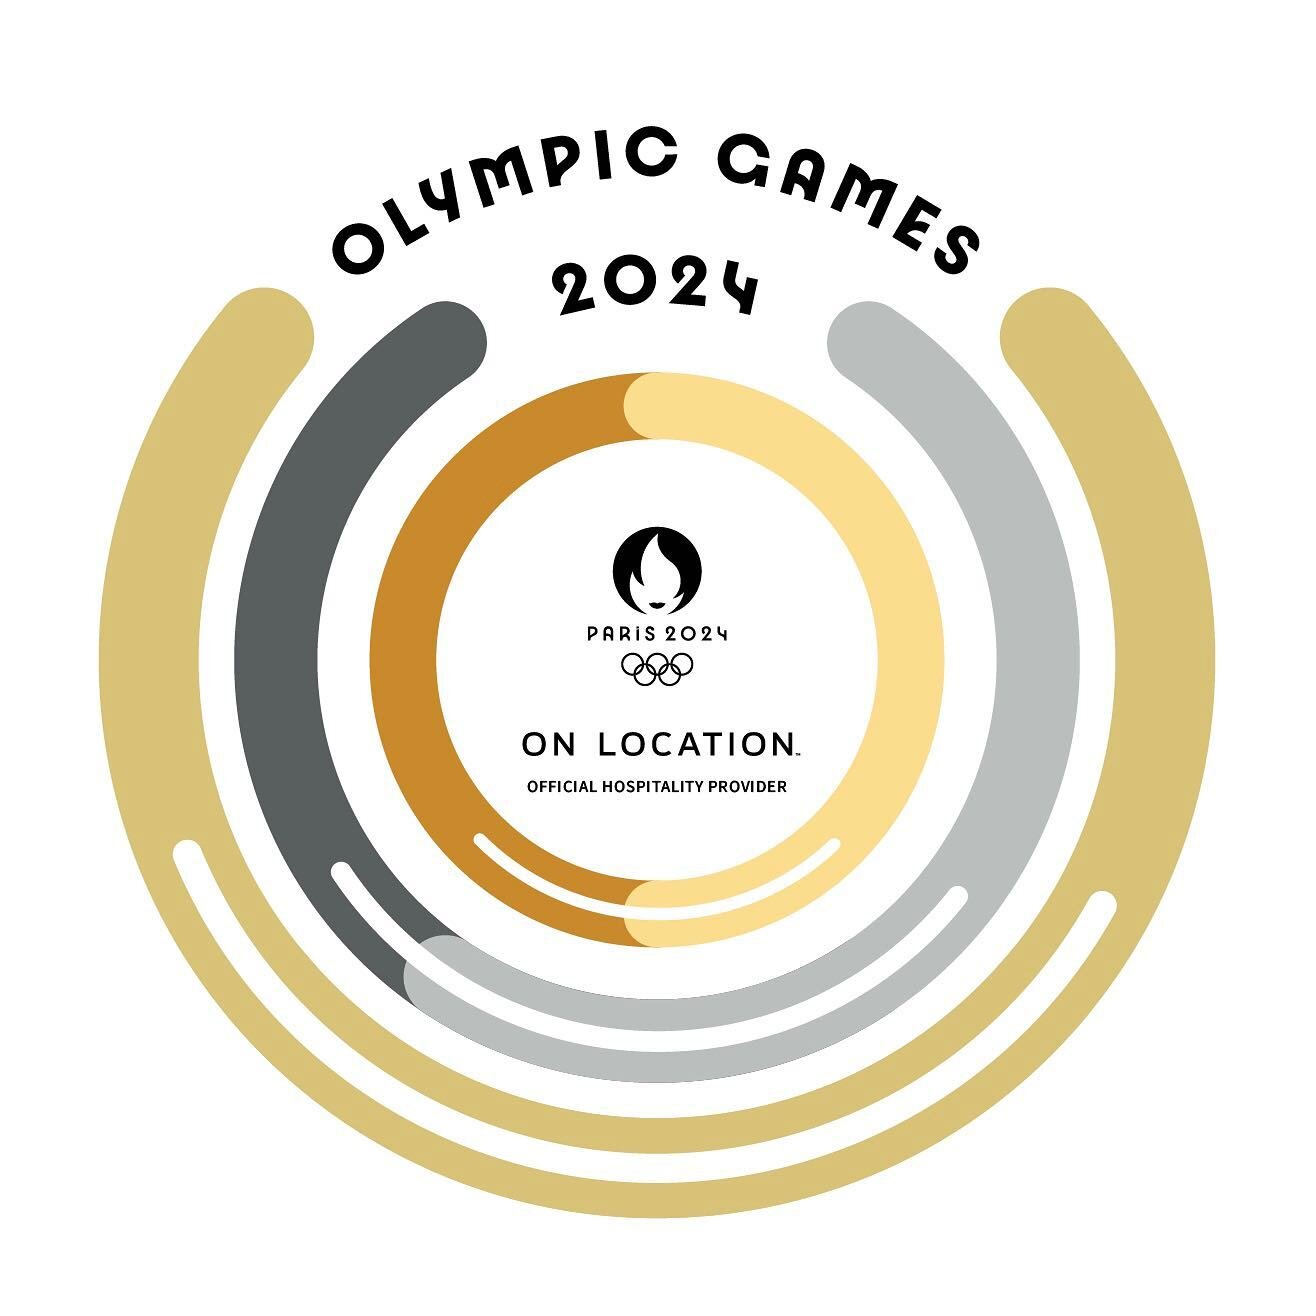 Pattern, tabletop decor, coaster and napkin designs for the Paris 2024 Olympic Games